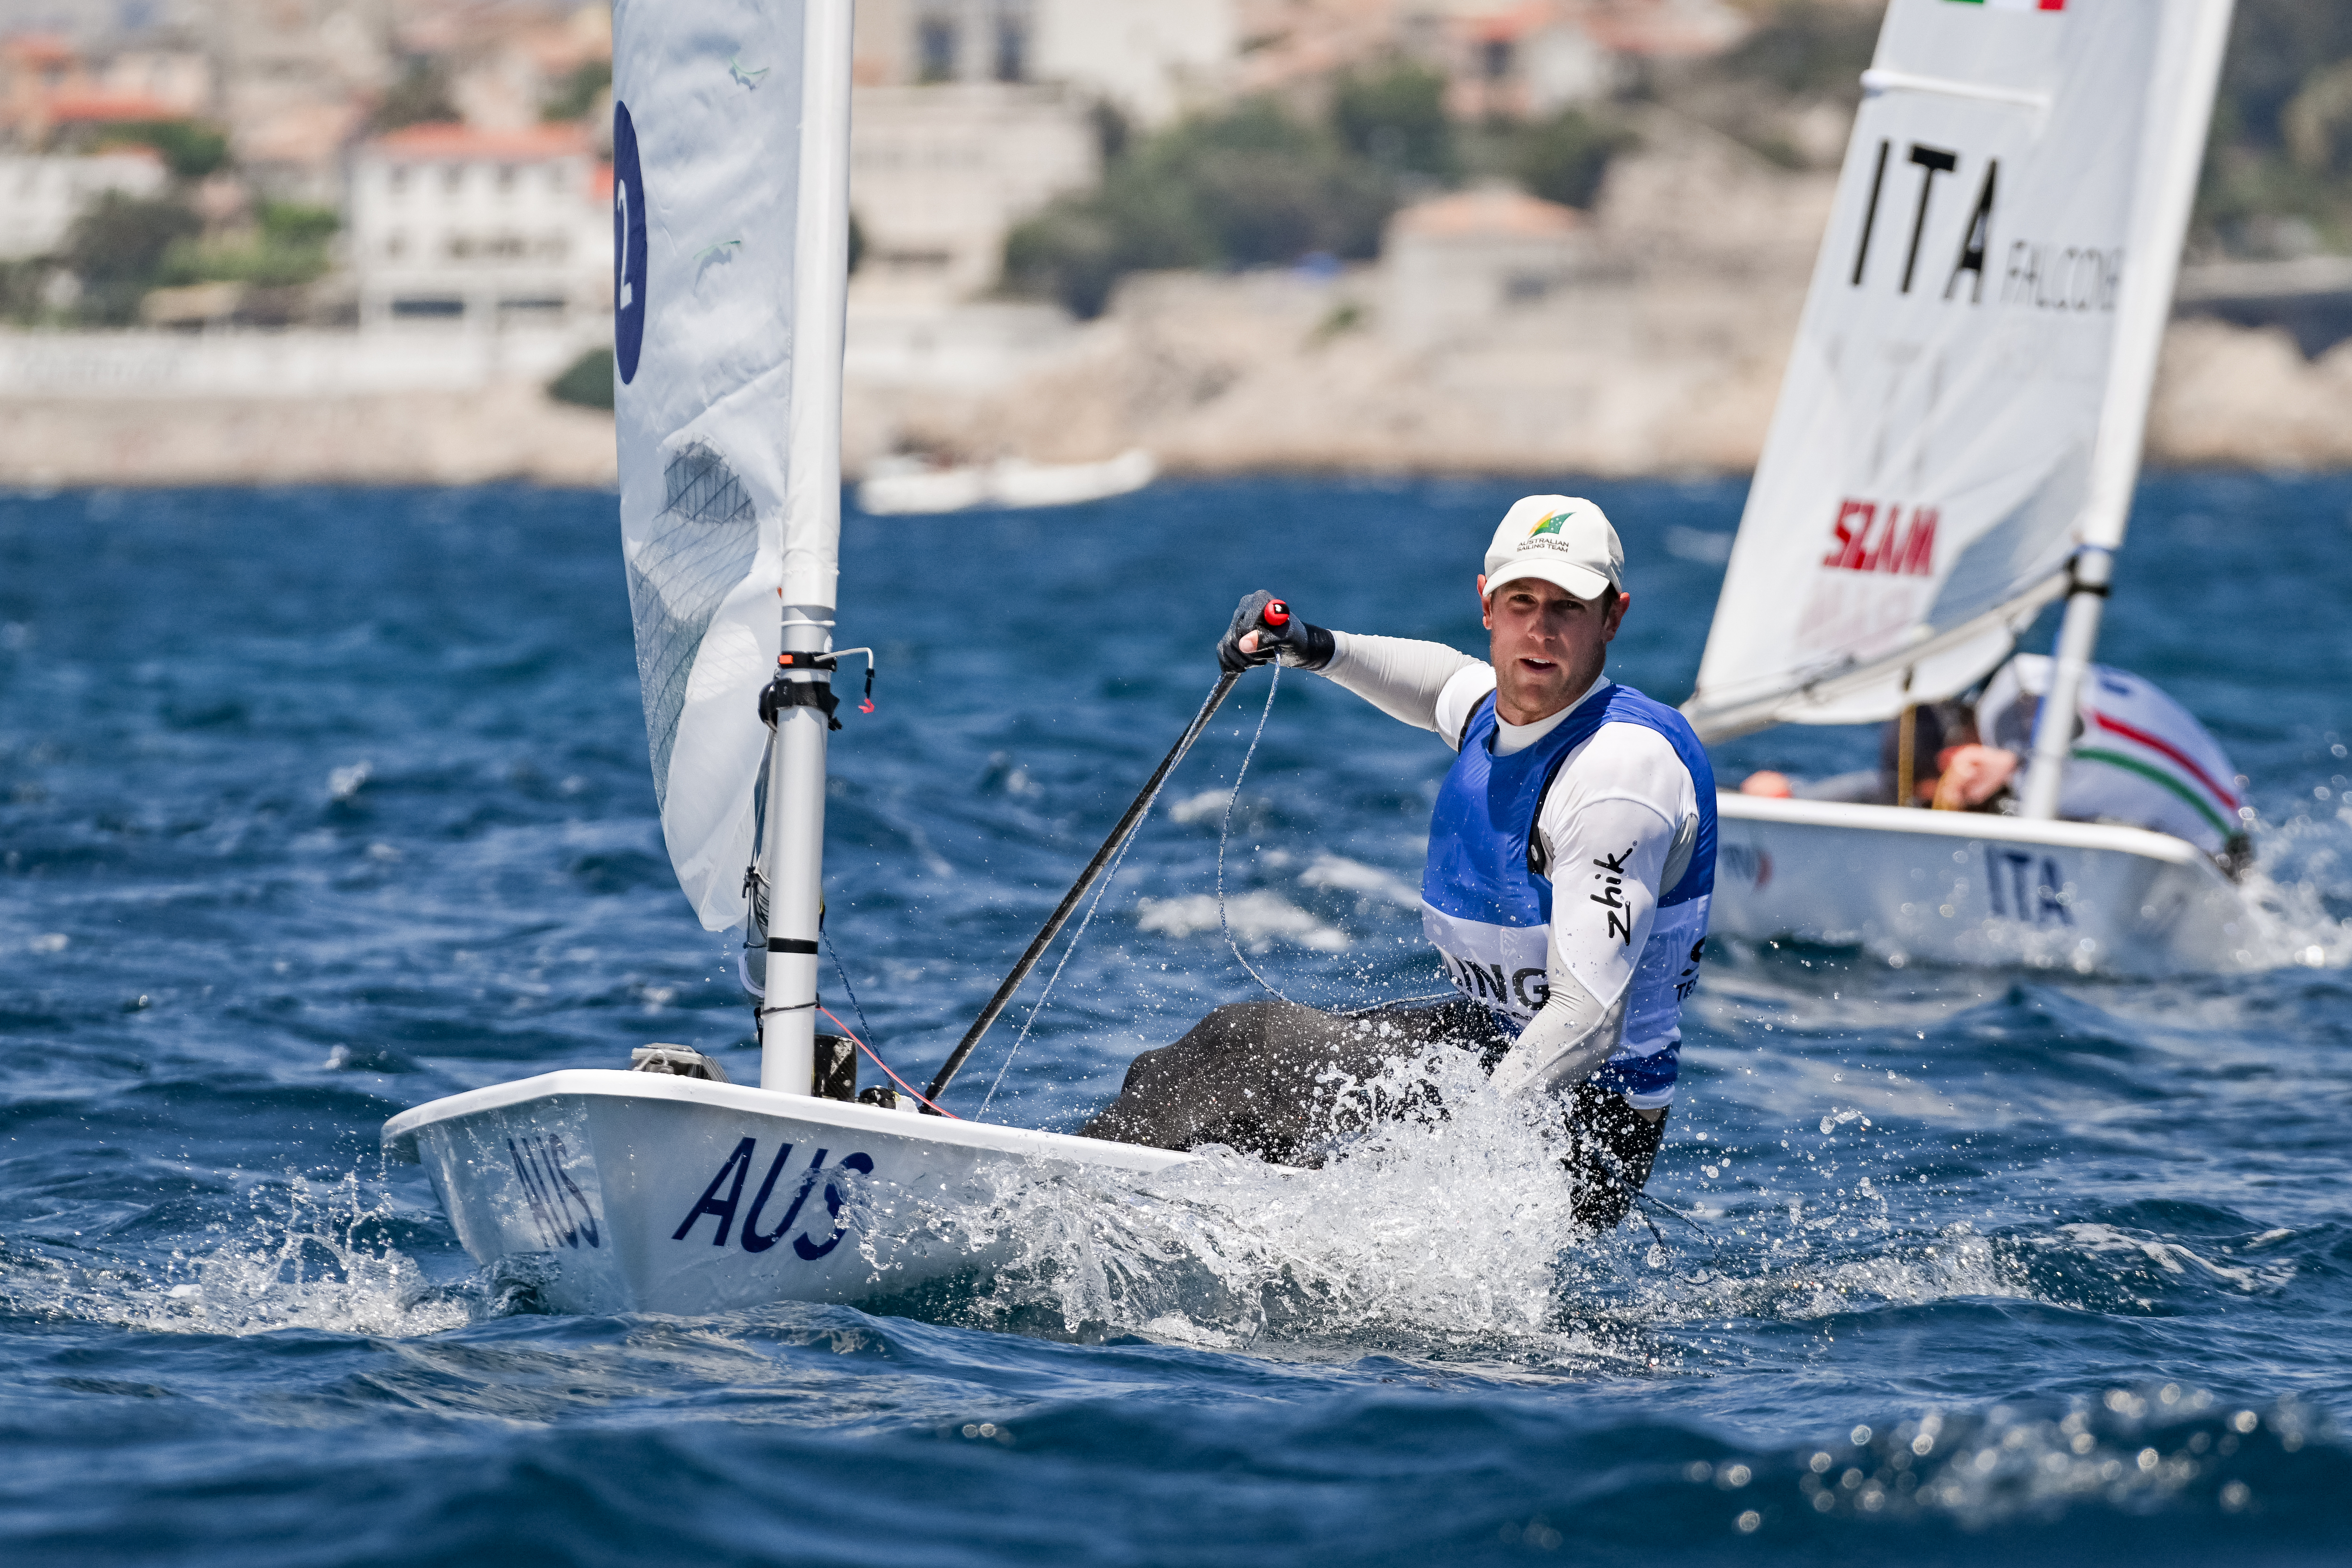 Matthew Wearn representing AUS ILCA 7 racing the ILCA 7 medal race during day seven of the Paris 2024 Sailing Test Event at Marseille Marina